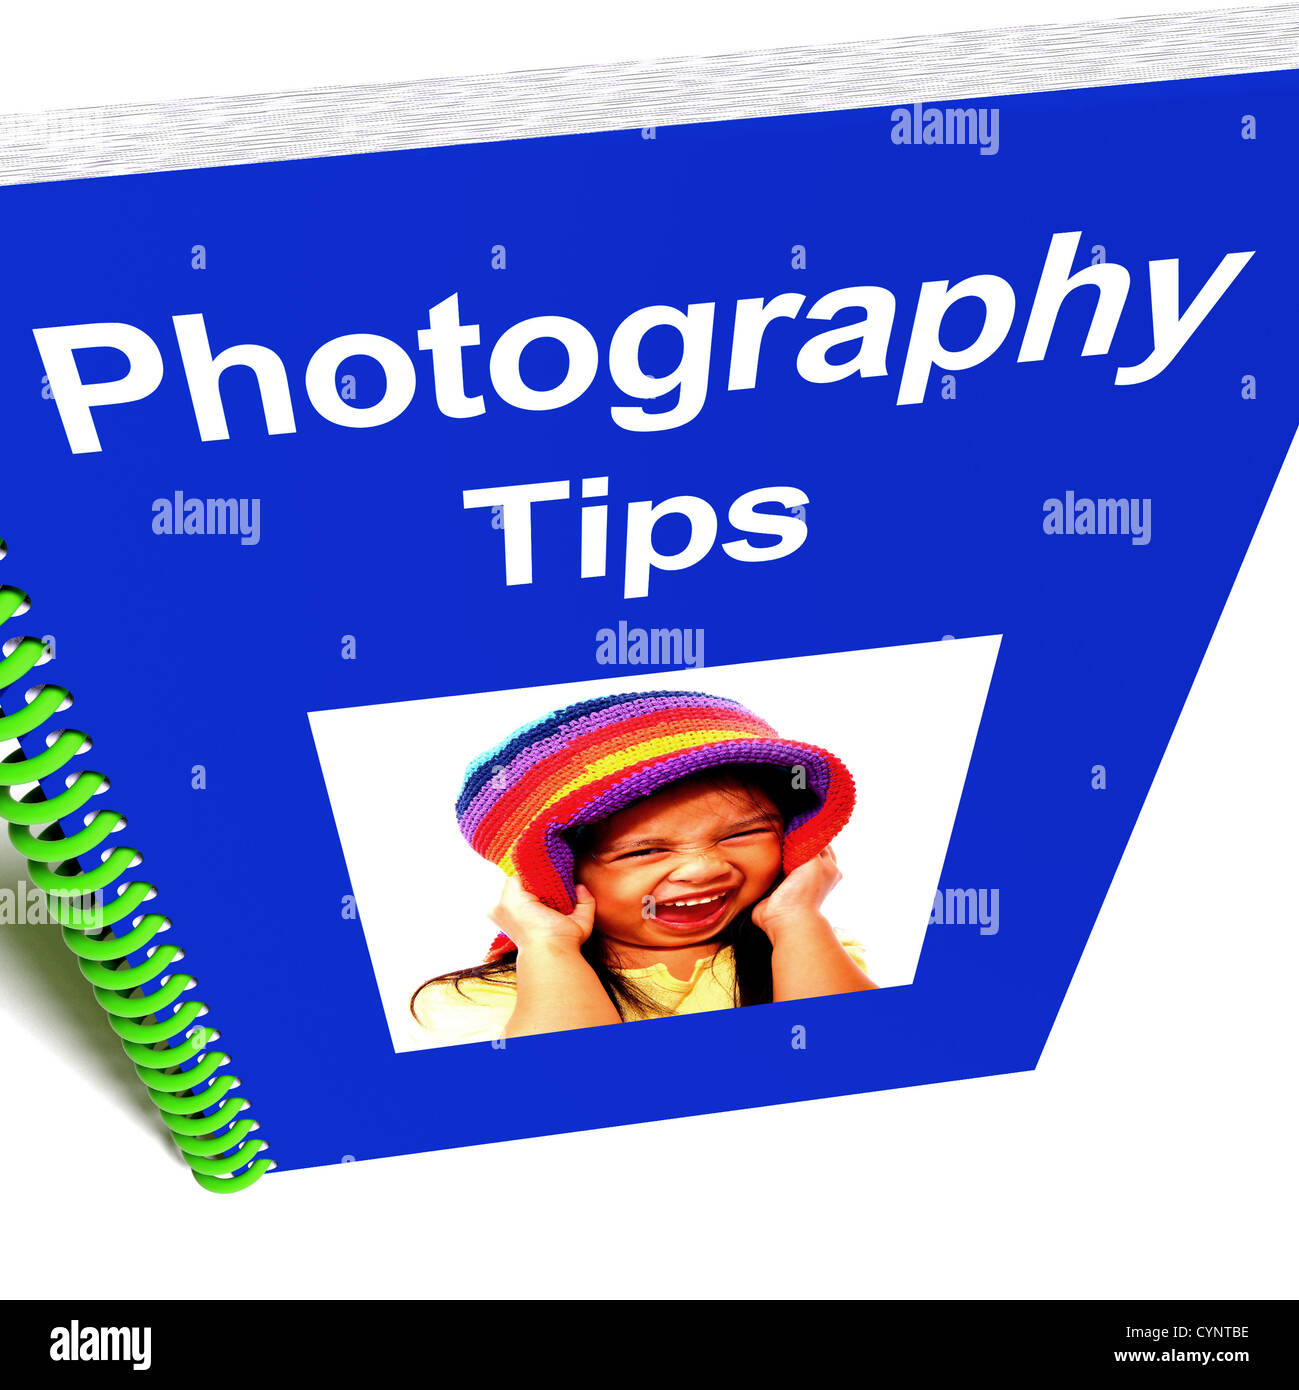 Photography Tips Book For Photographic Guidance Stock Photo